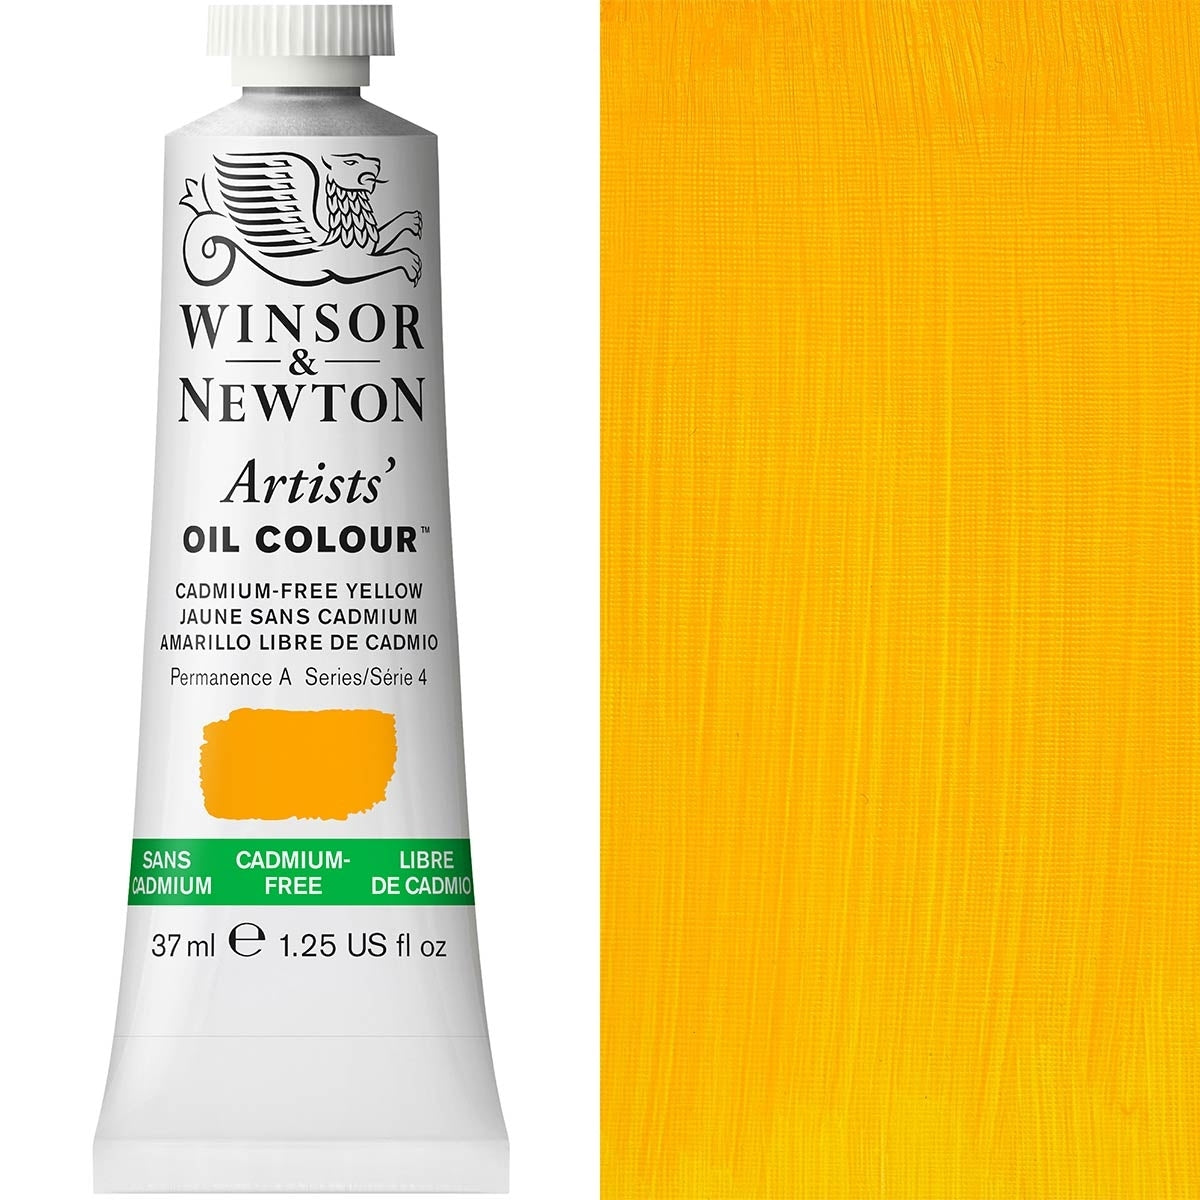 Winsor and Newton - Artists' Oil Colour - 37ml - Cad Free Yellow